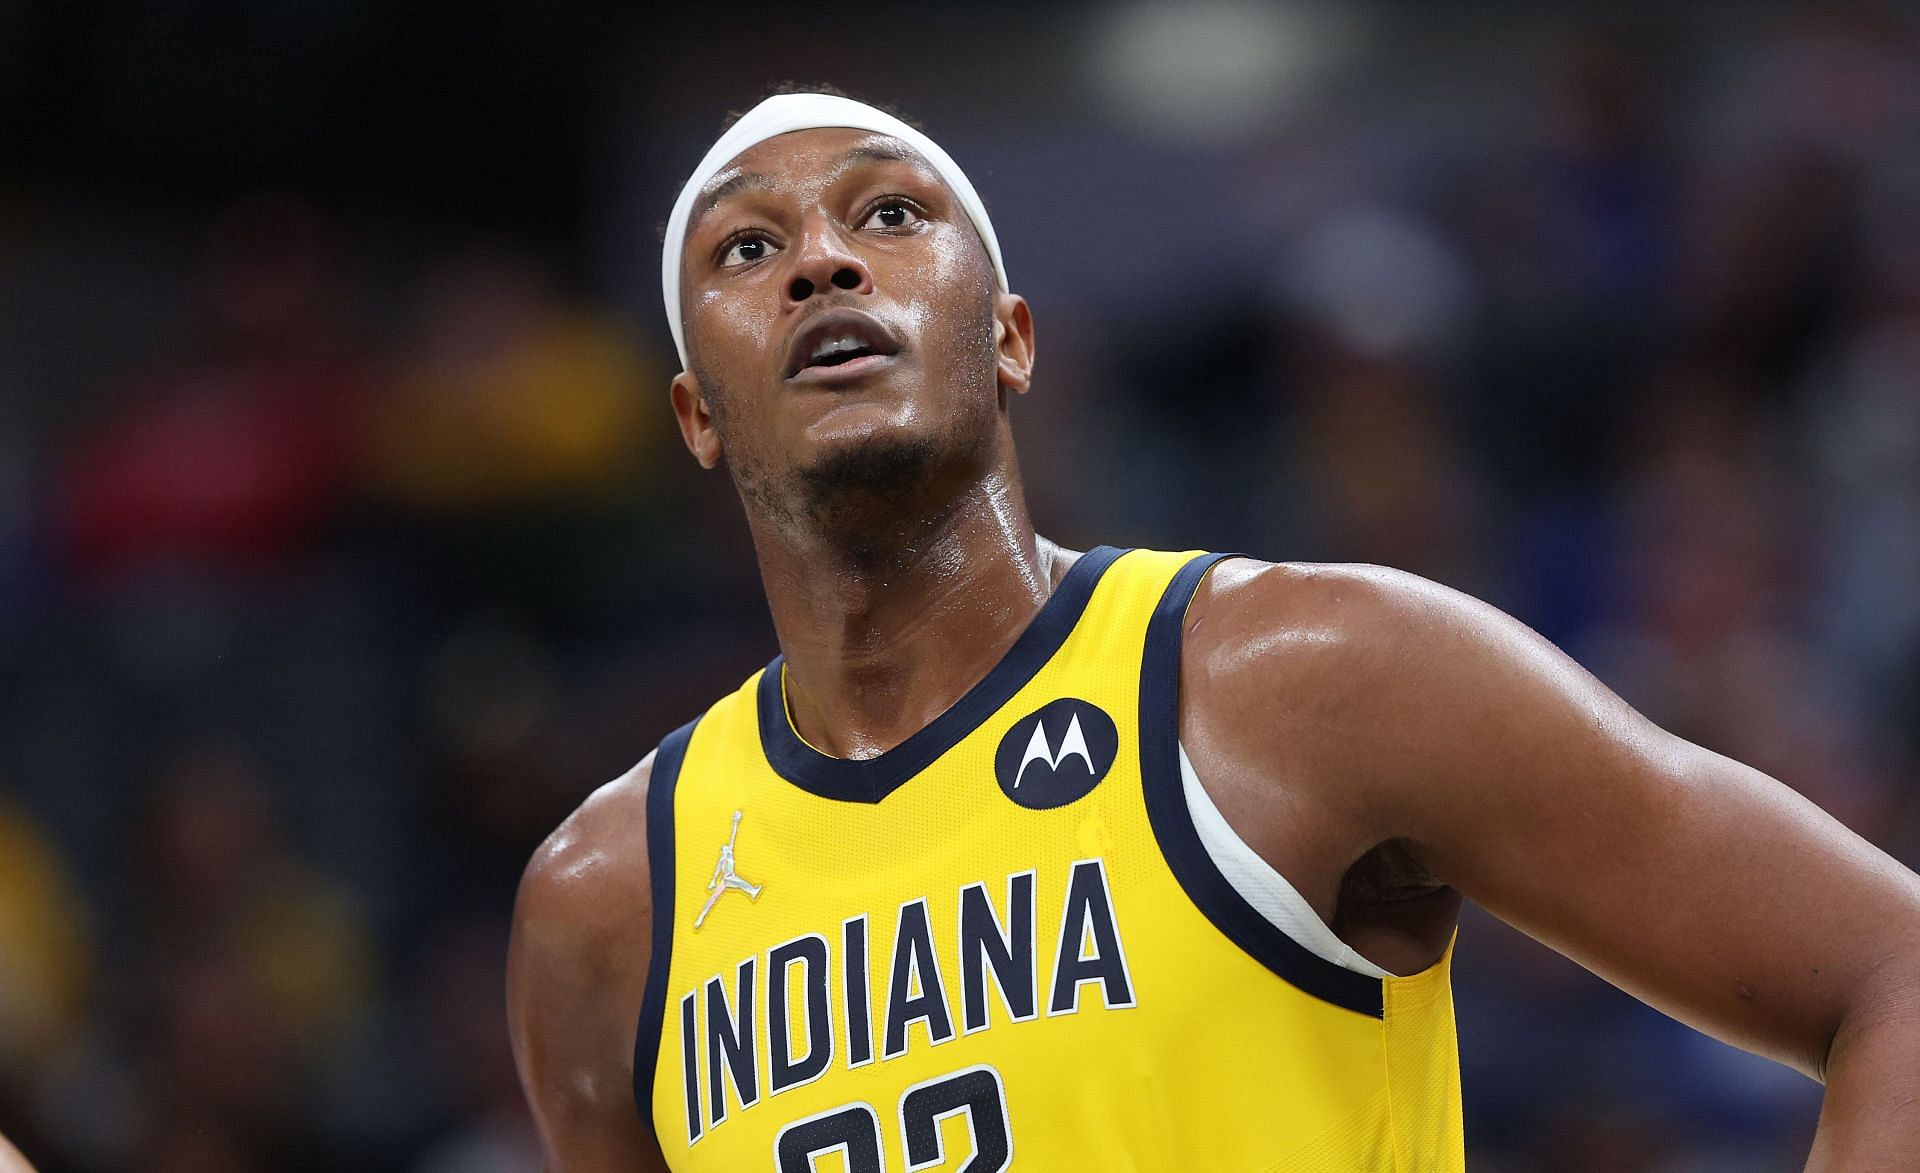 The Indiana Pacers will be without Myles Turner for this game.